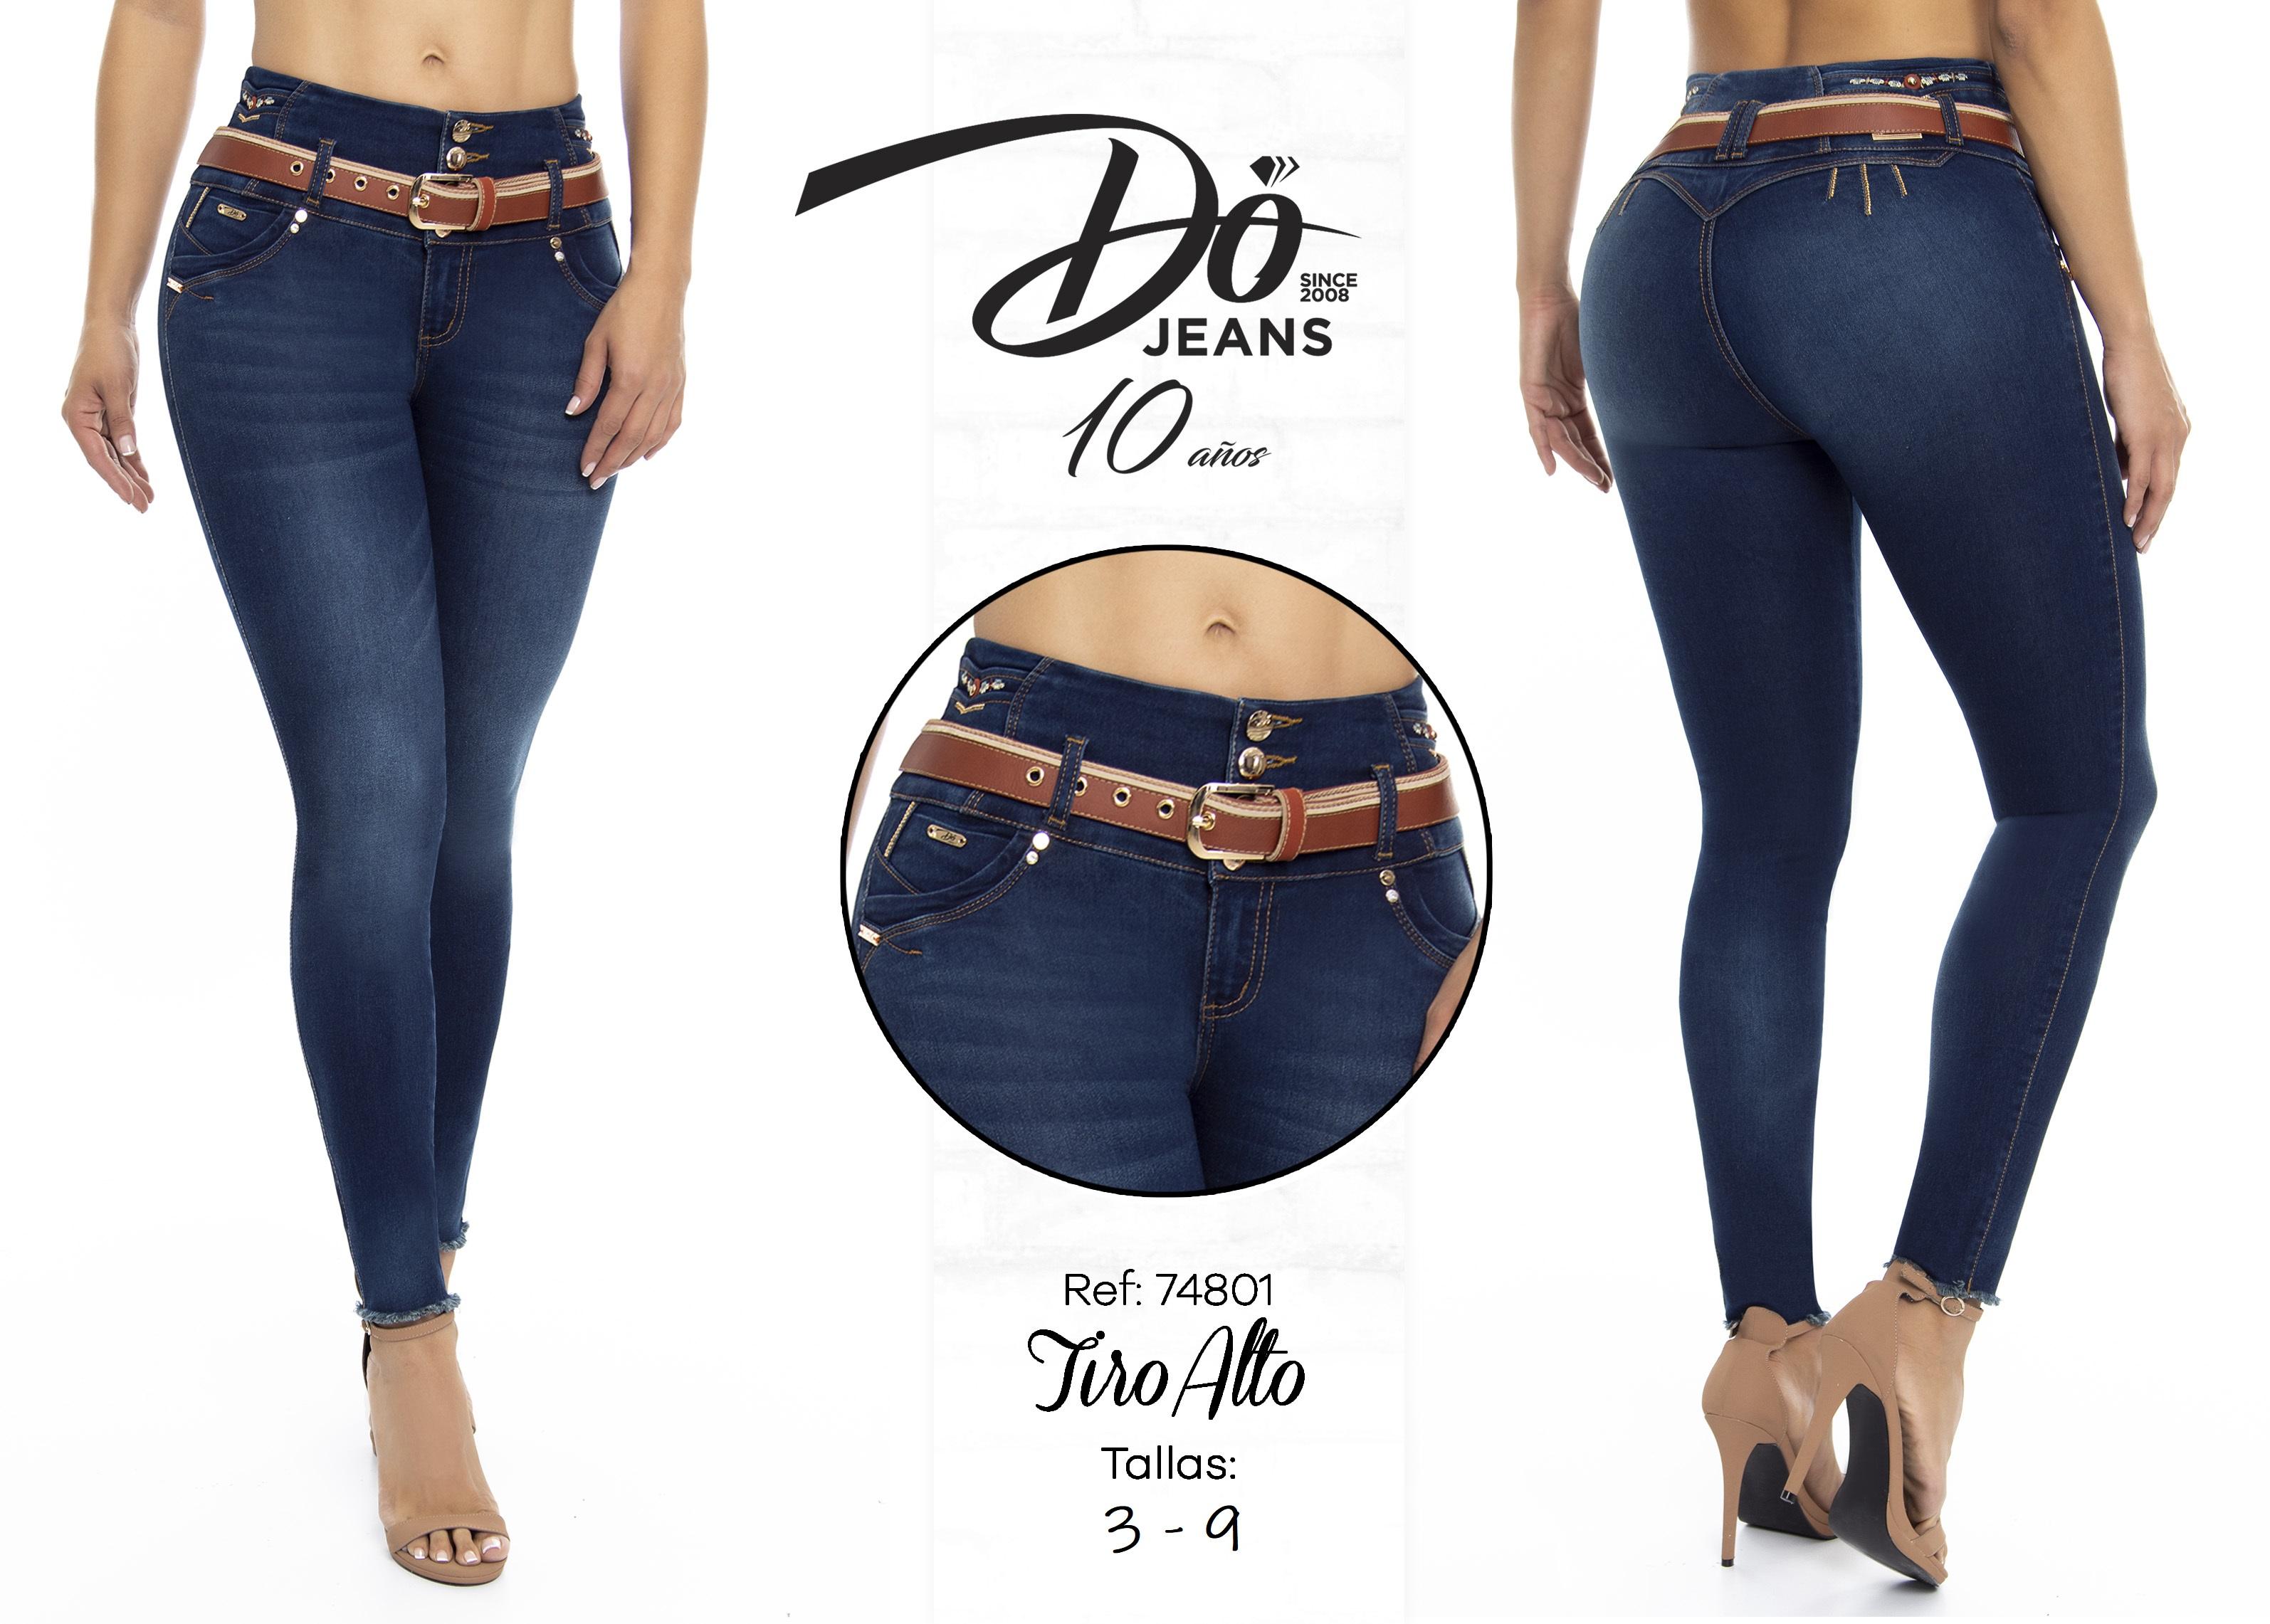 Jeans Levantacola Colombiano - Ref. 248 -74801 D